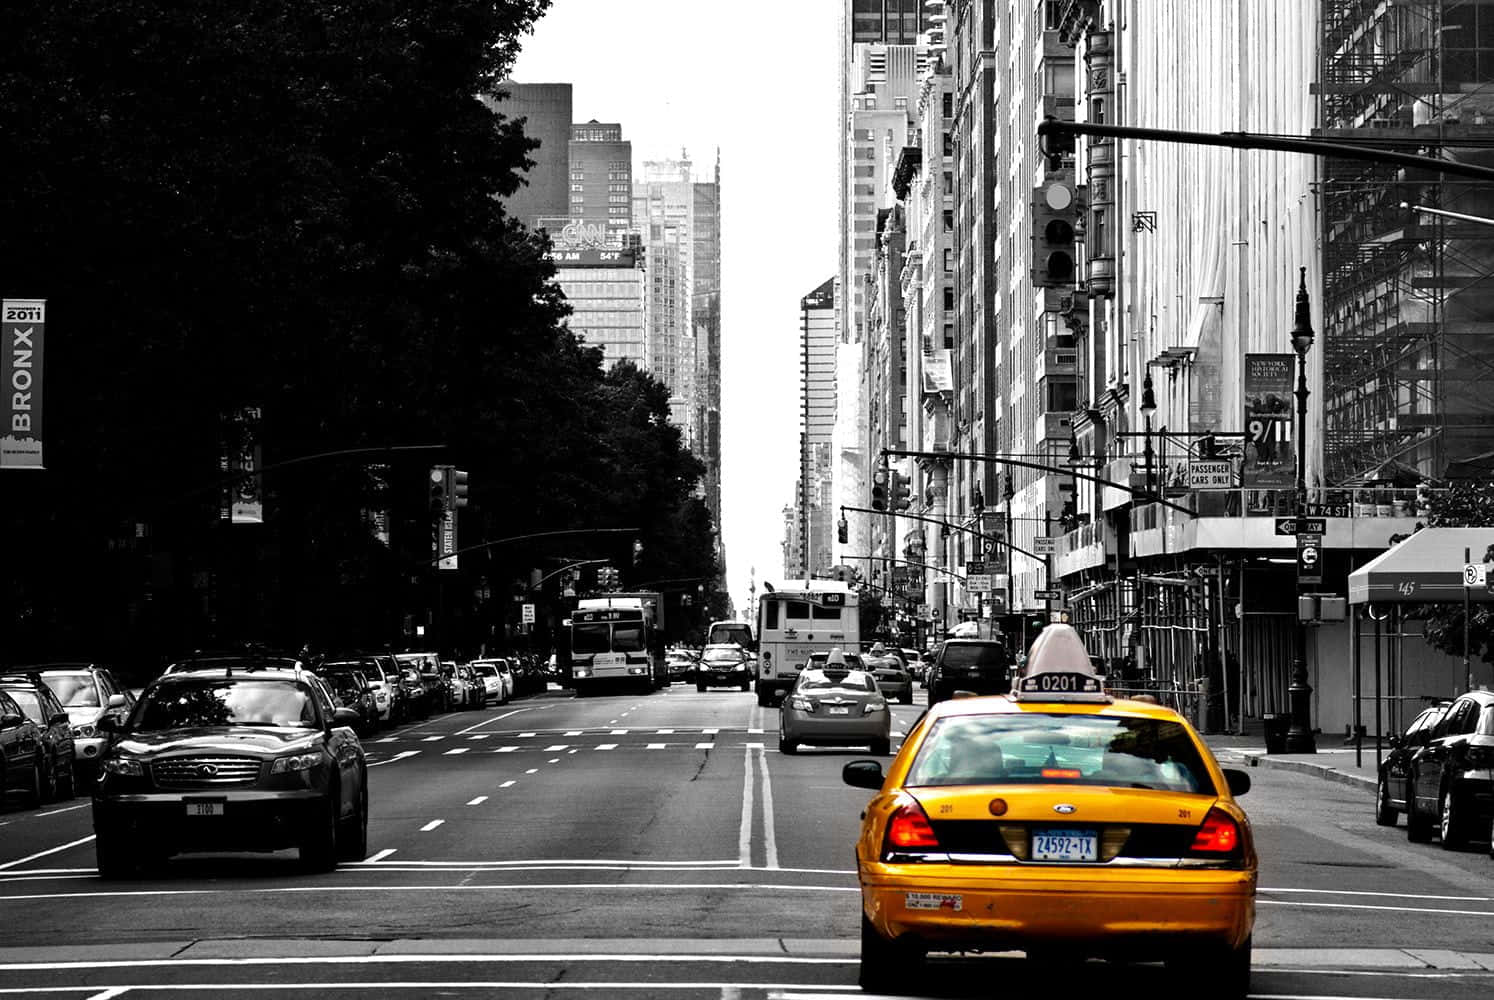 Yellow Cab parked in the city Wallpaper